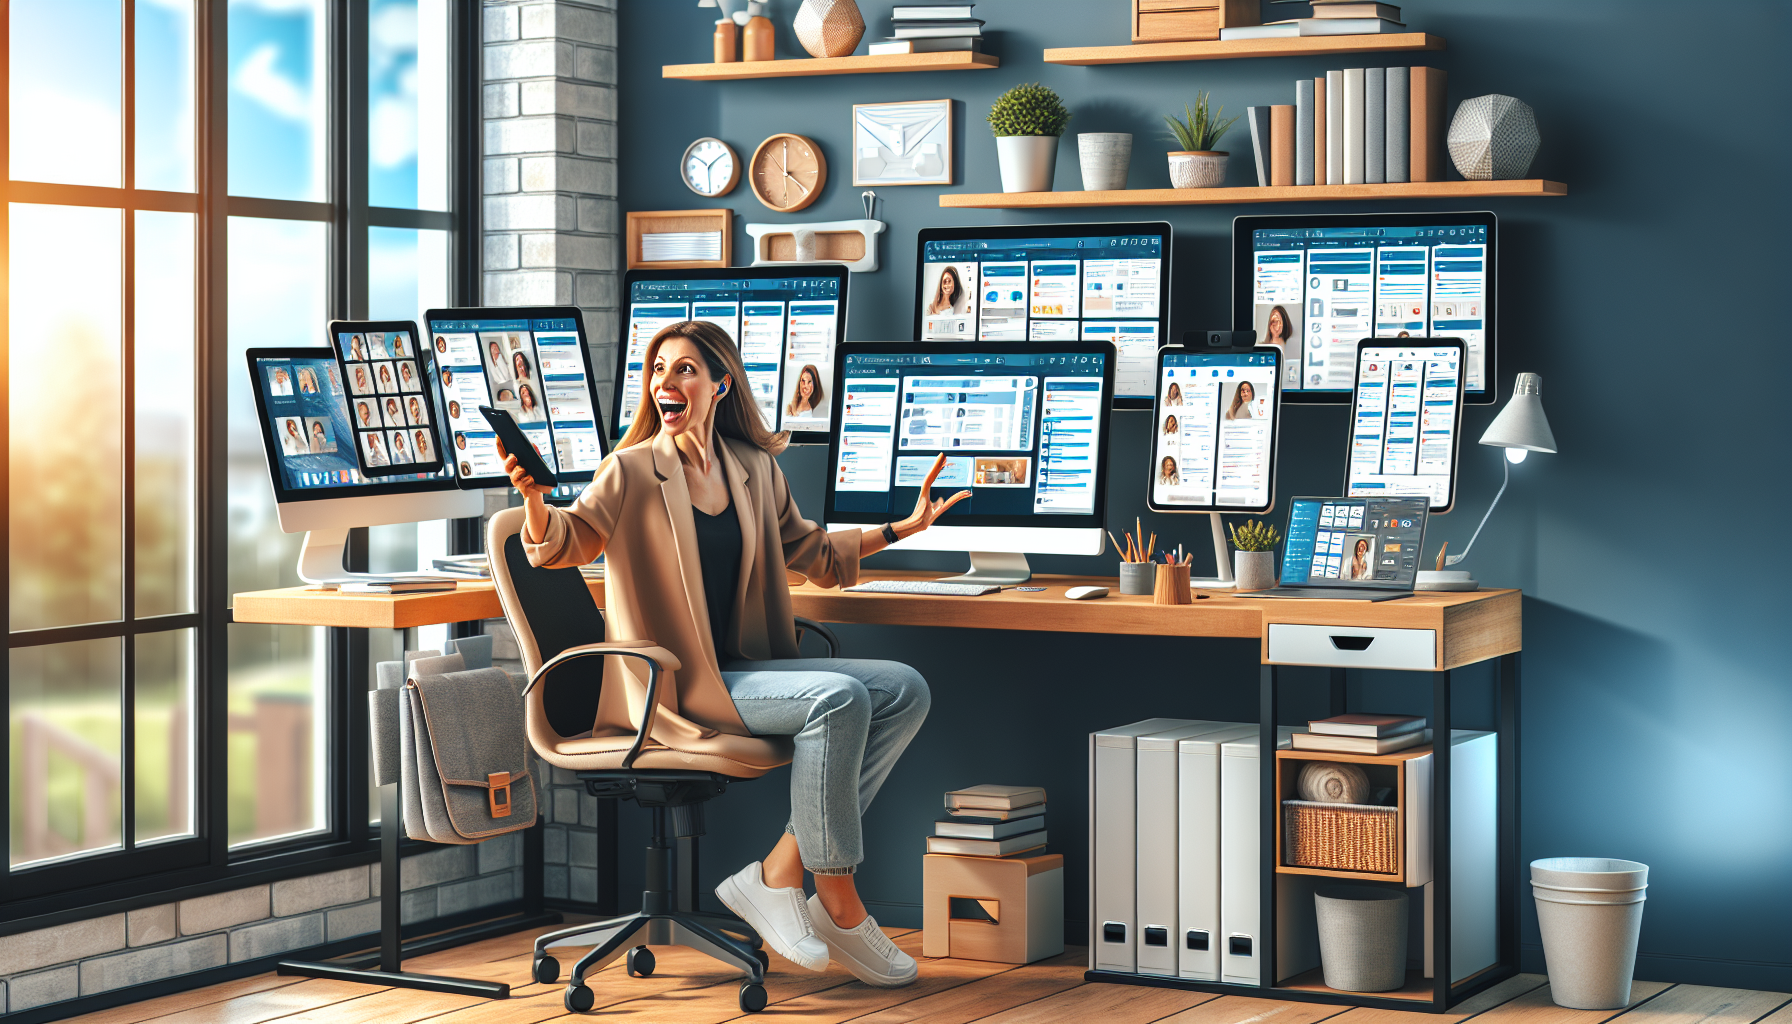 Create an image of a professional virtual assistant working from a home office setup. The assistant is seen multitasking on a computer with multiple screens, a tablet, and a smartphone, all displaying